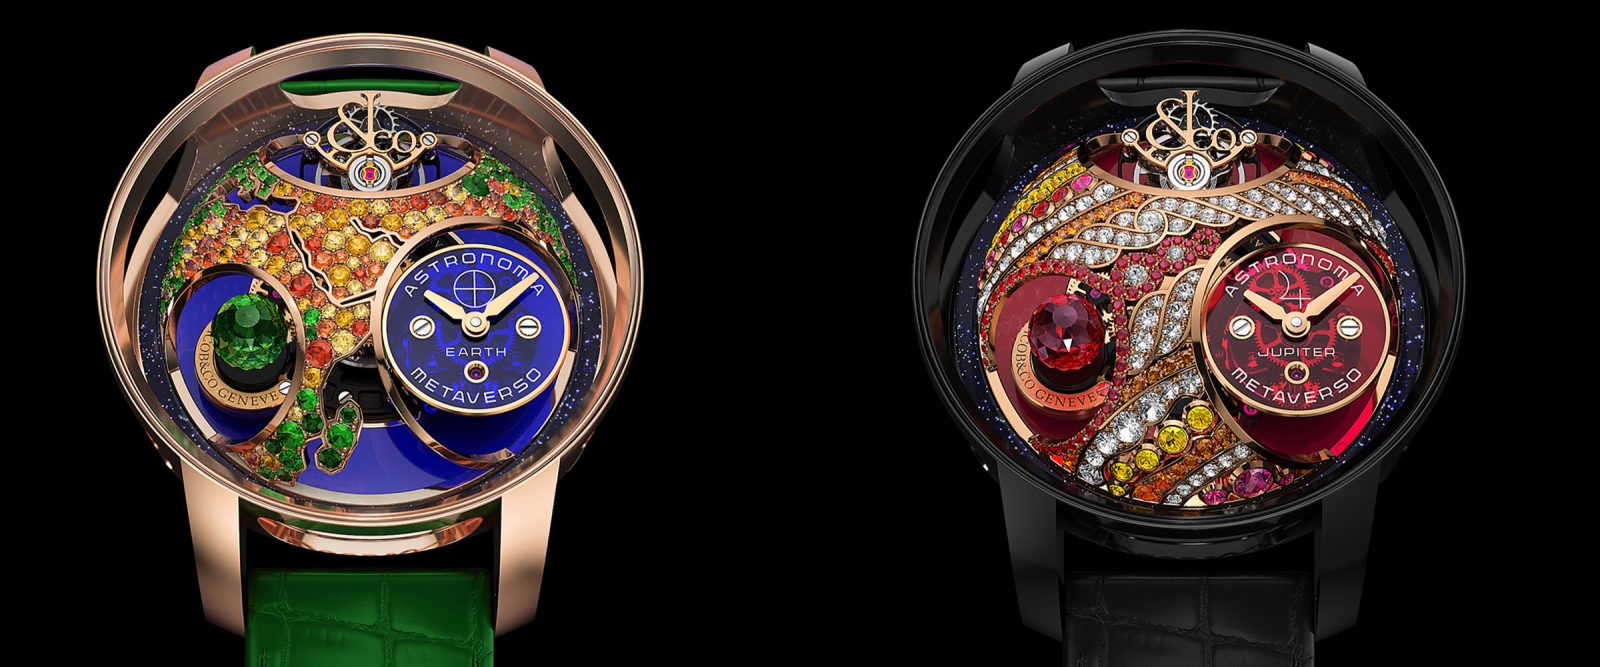 Jacob & Co. Announces First-ever Luxury NFT Collection: Astronomia Metaverso